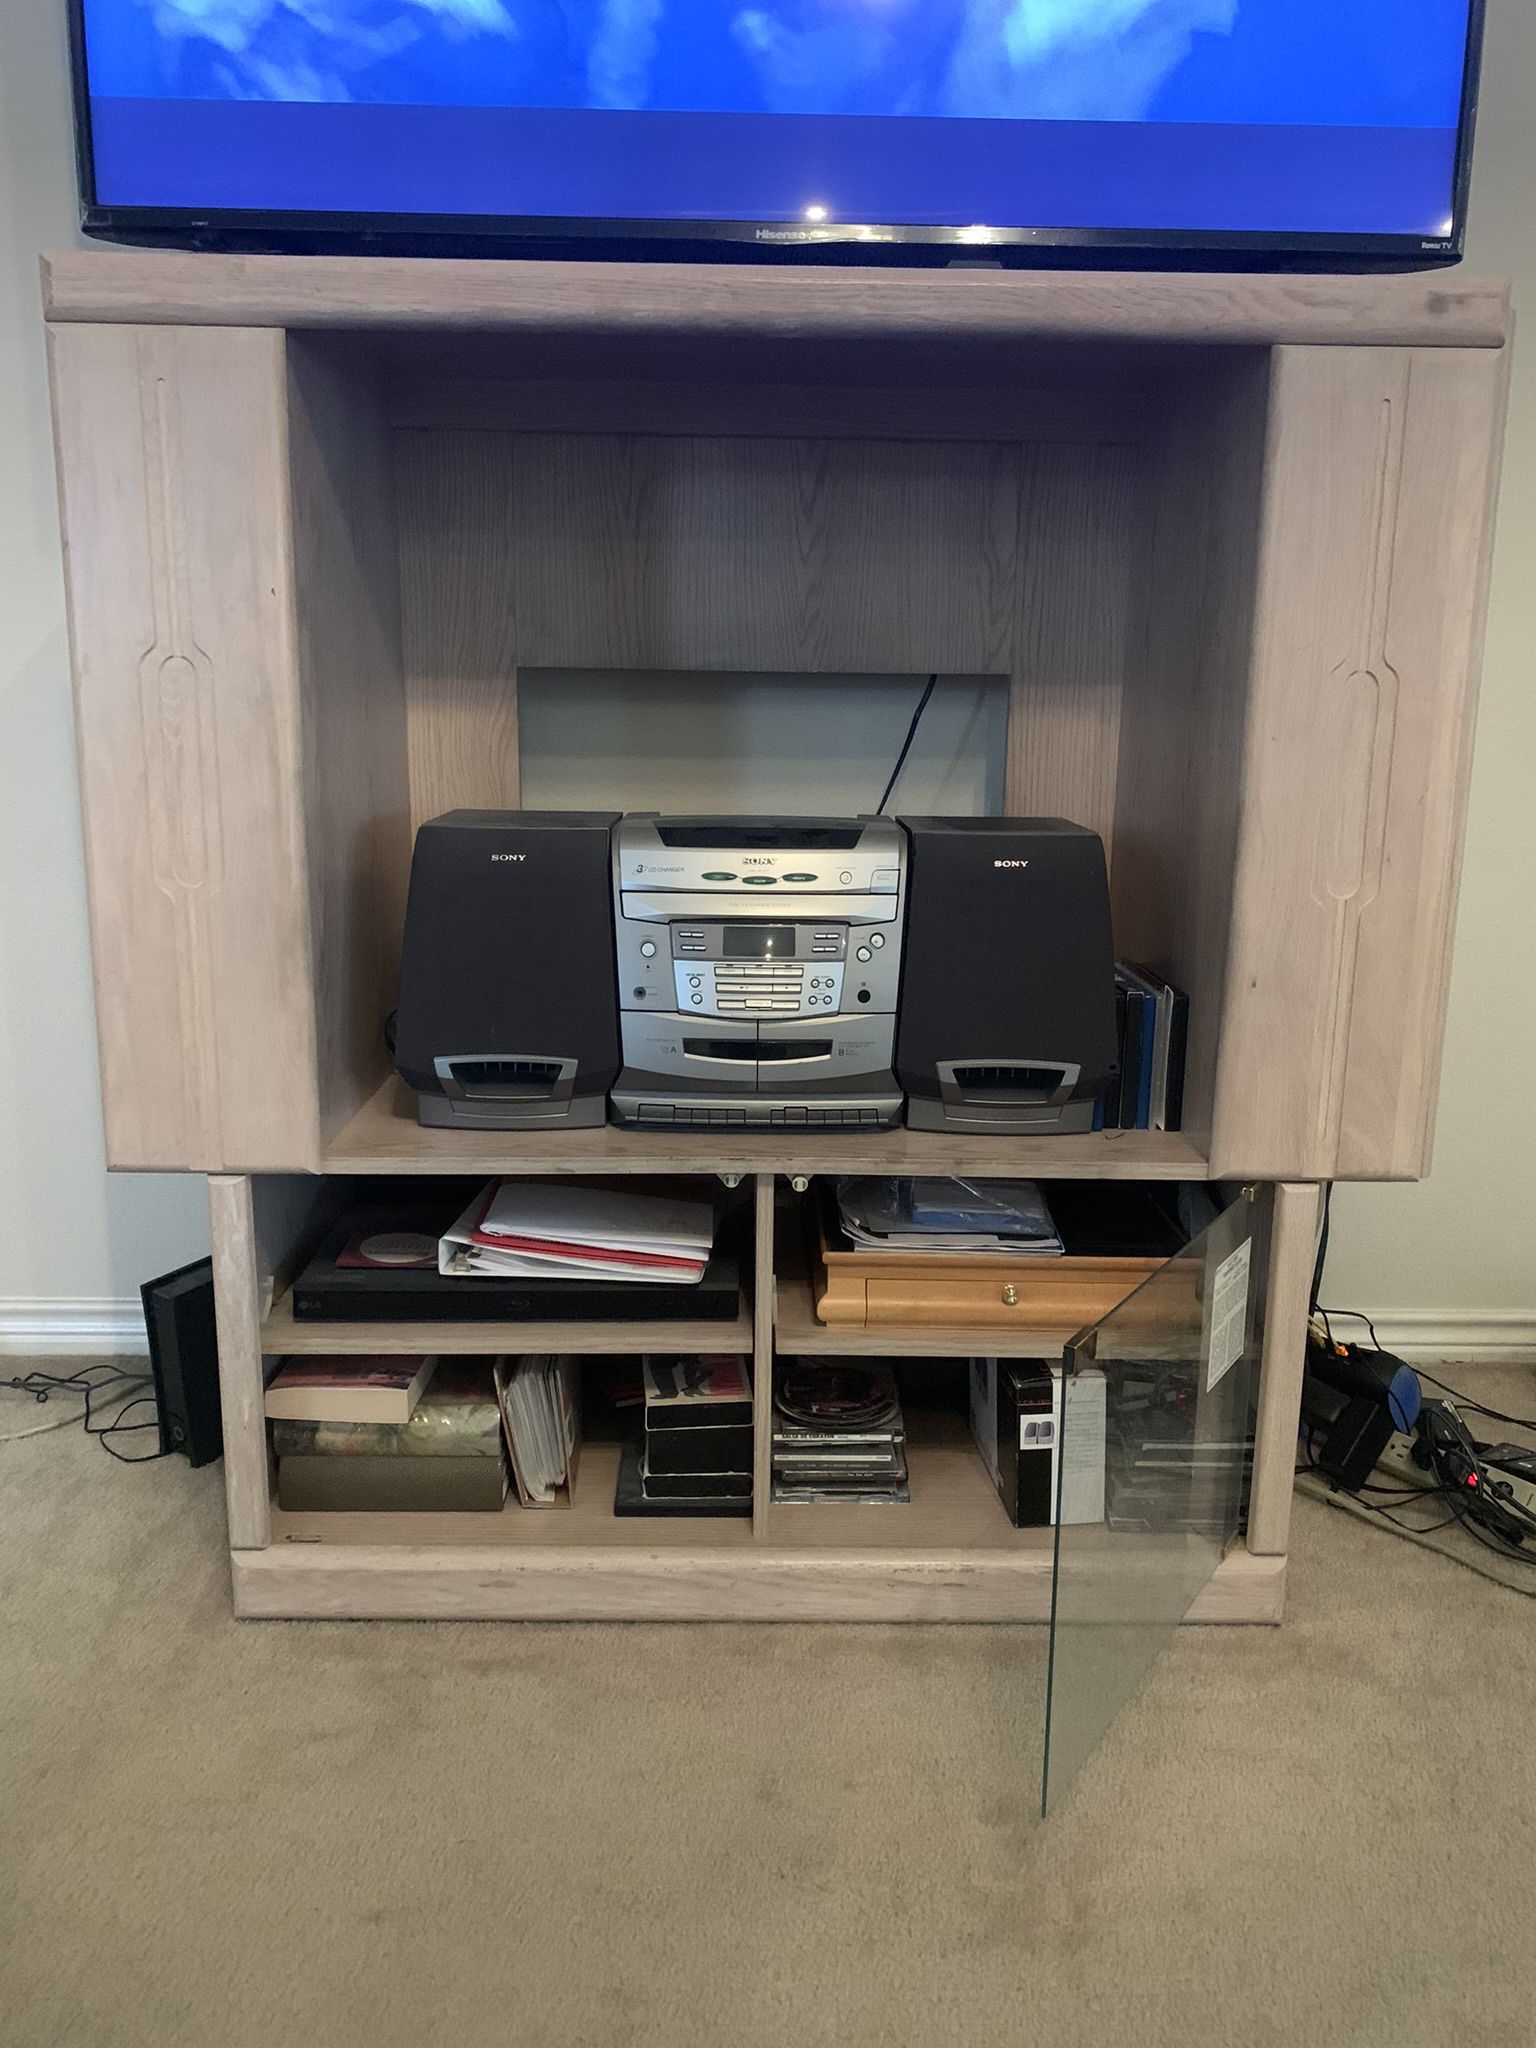 TV Stand Console